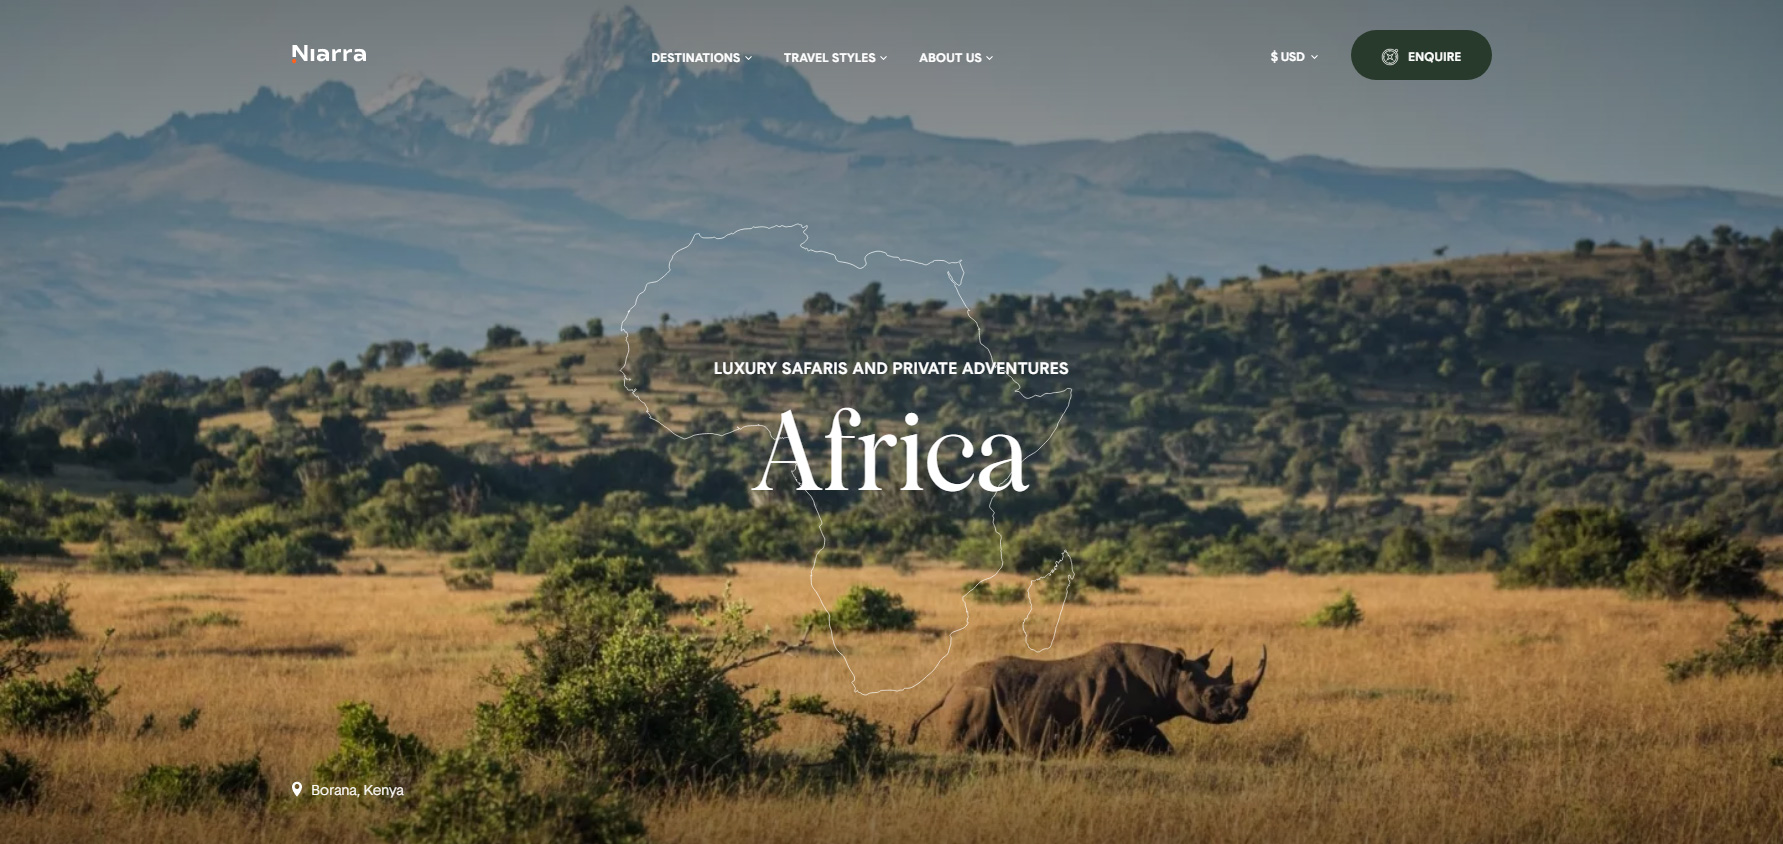 Niarra Travel - Website of the Day